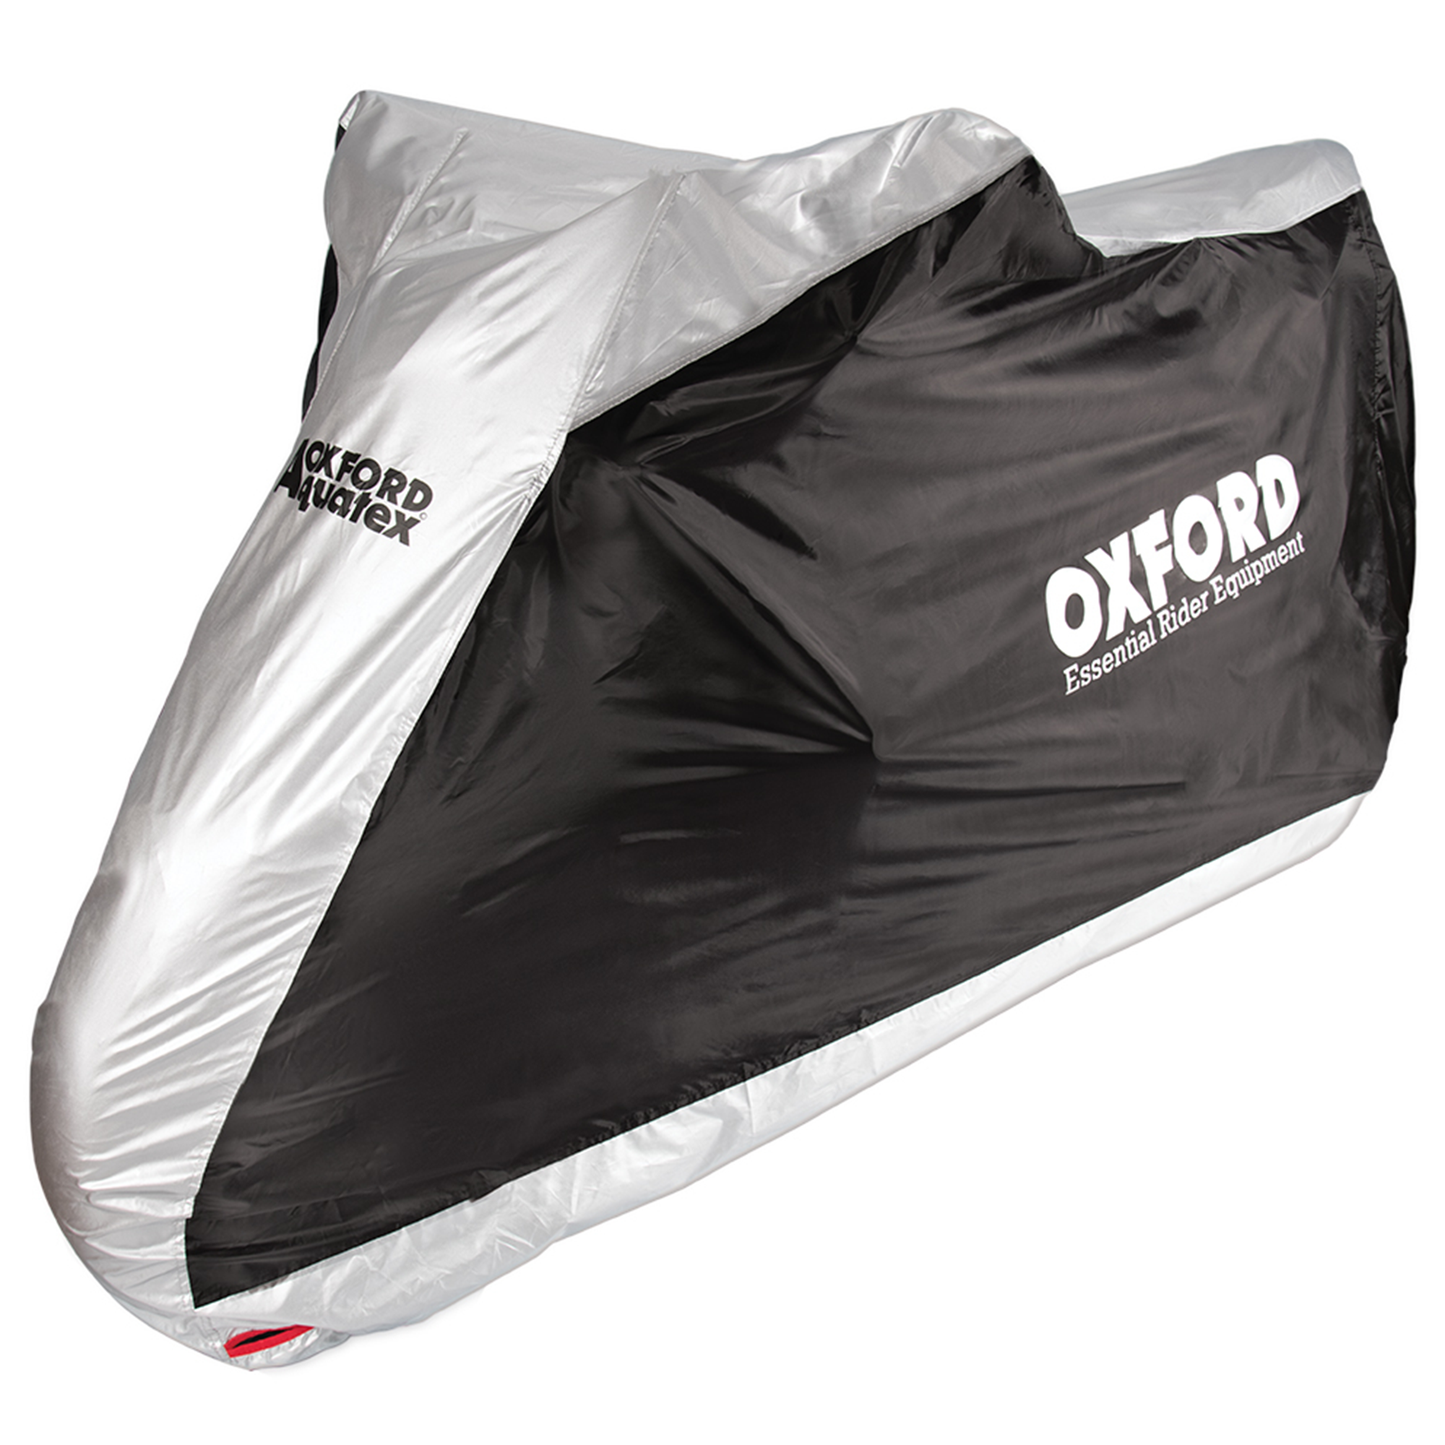 Oxford Aquatex Motorcycle Cover